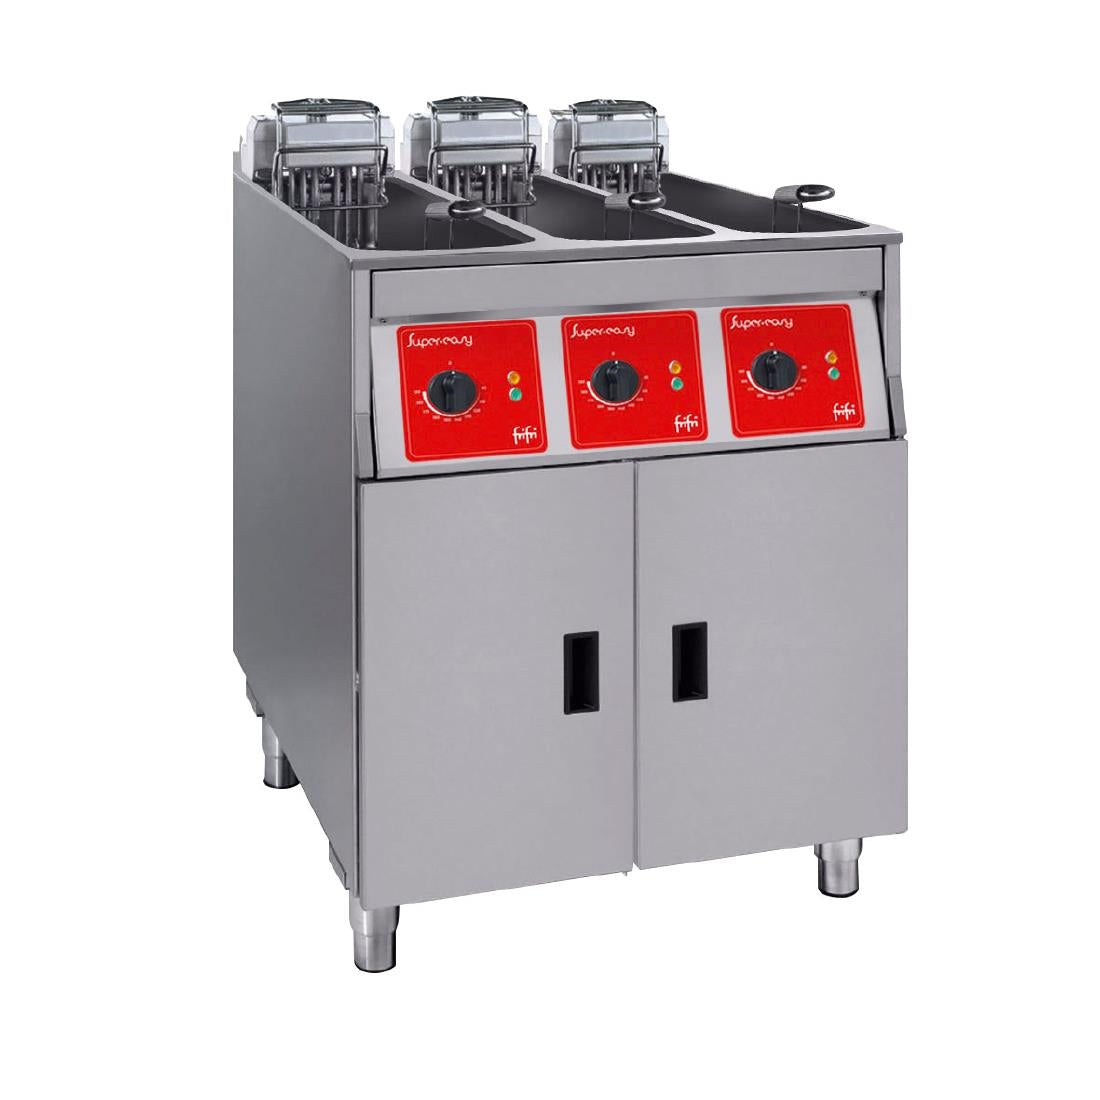 HS079-3PH FriFri Super Easy 633 Electric Free-standing Fryer Triple Tank Triple Basket without Filtration 3x11kW Three Phase